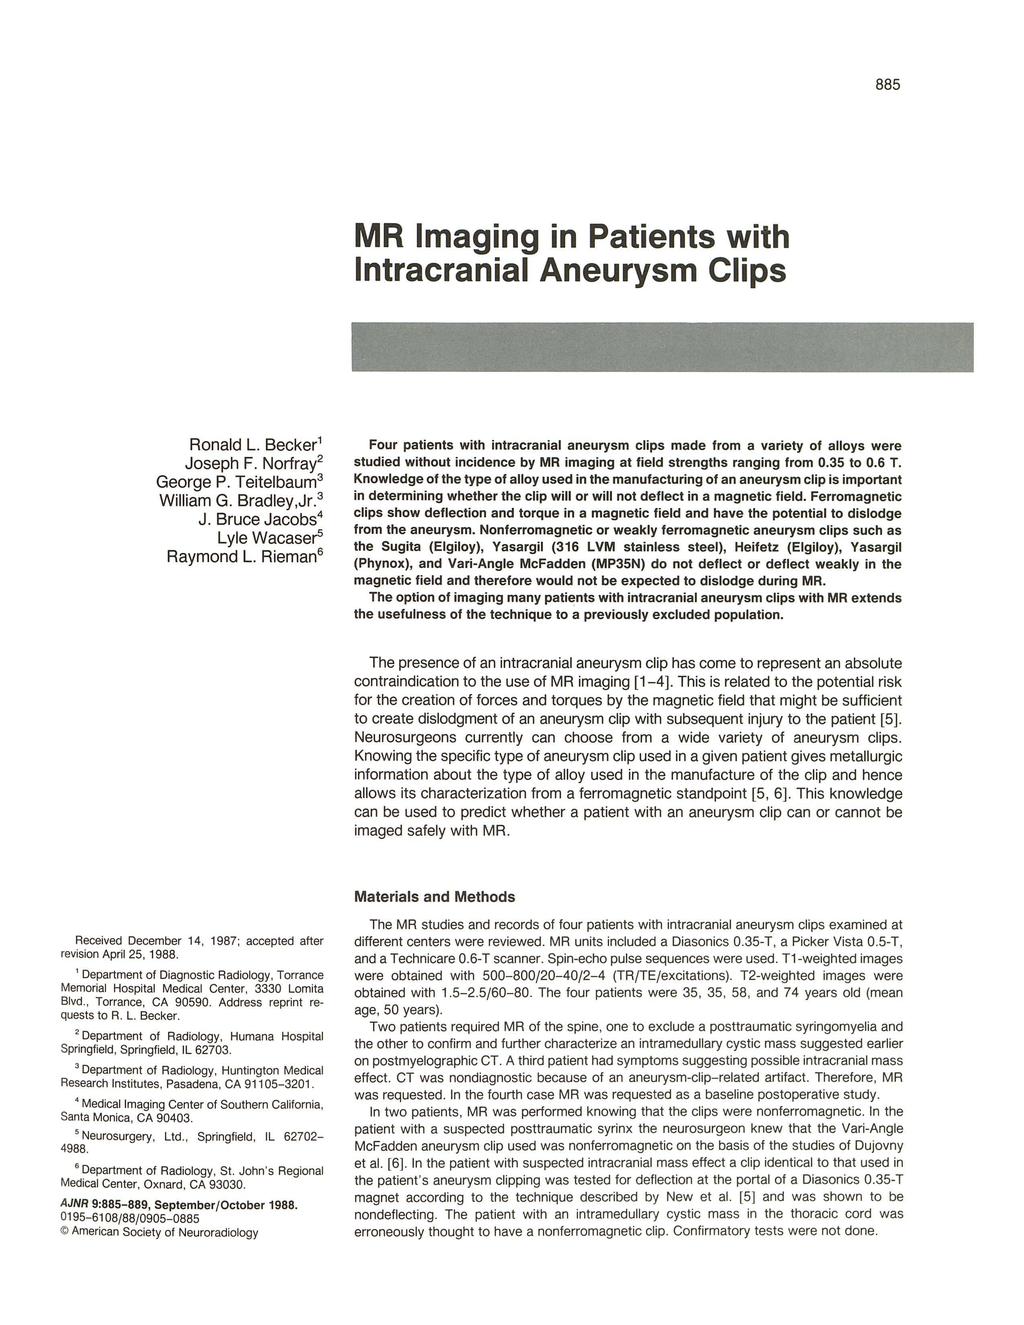 885 MR Imaging in Patients with Intracranial Aneurysm Clips Ronald L. Becker 1 Joseph F. Norfral George P. Teitelbaum 3 William G. Bradley,Jr. 3 J. Bruce Jacobs 4 Lyle Wacaser Raymond L.